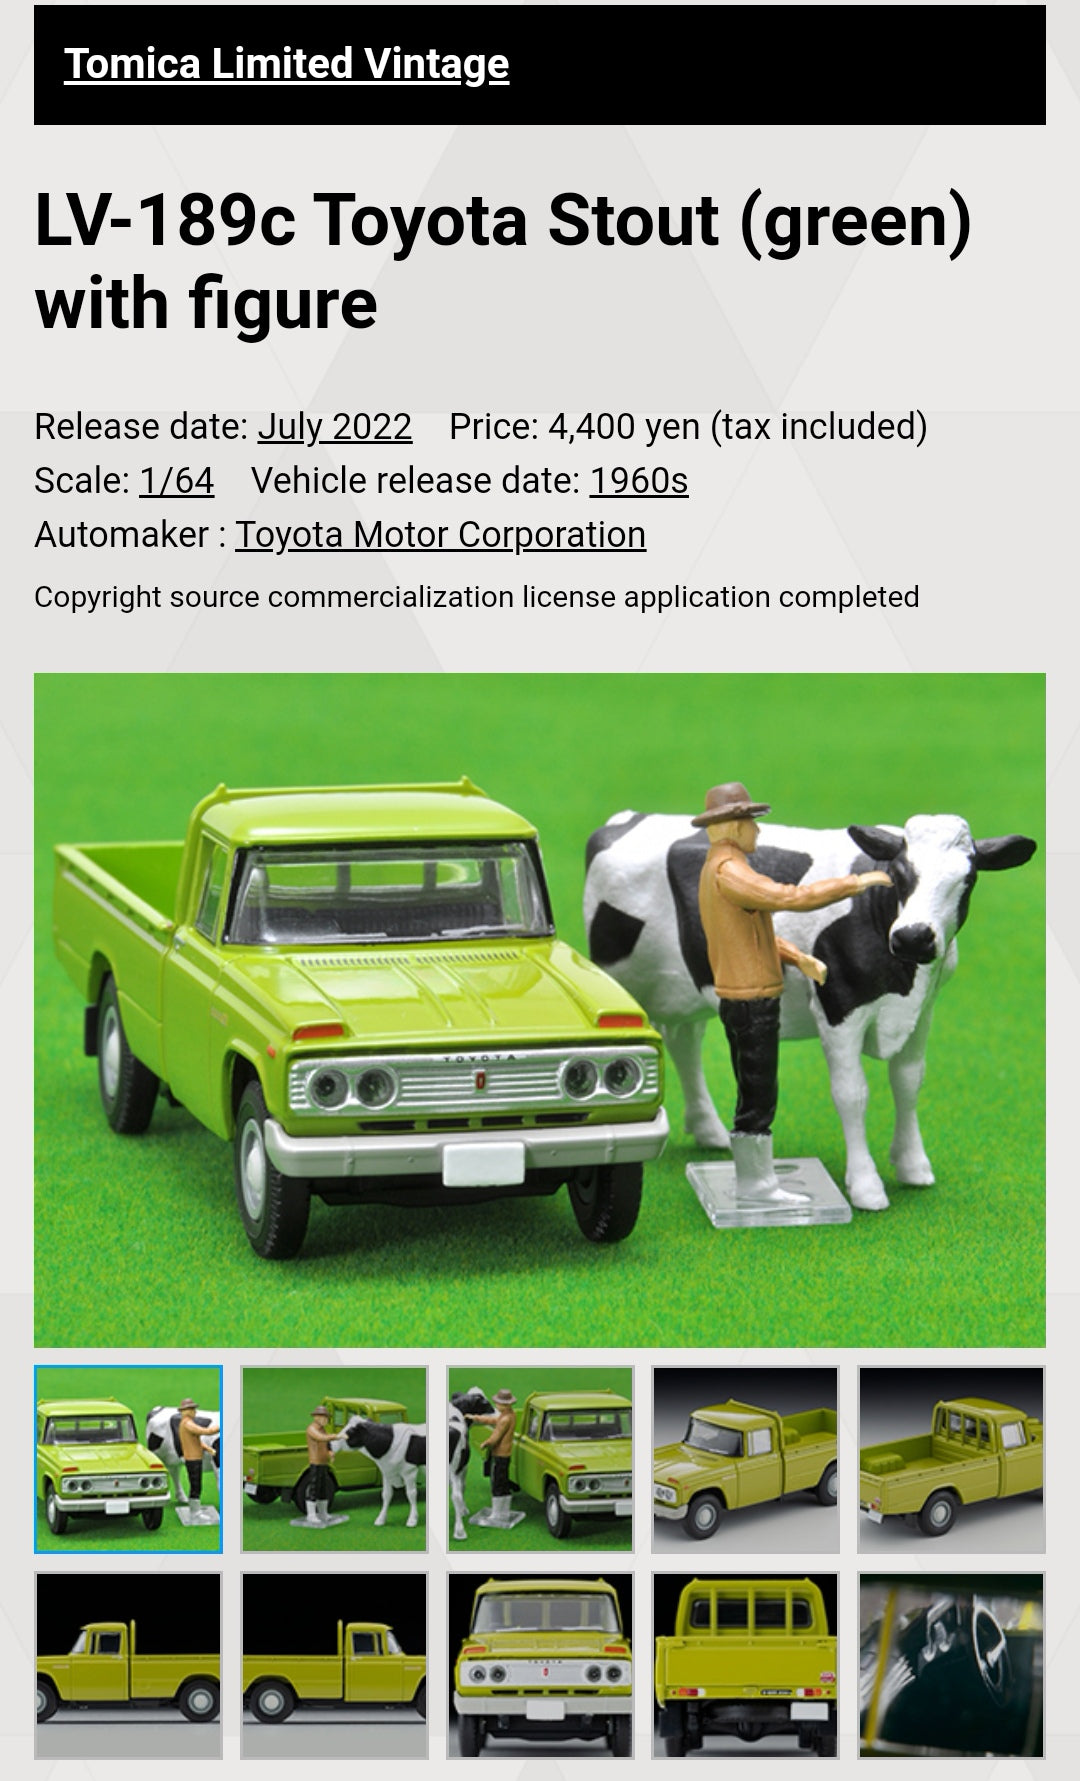 Tomica Limited Vintage LV-189c TOYOTA Stout Green with Figures Takara Tomy